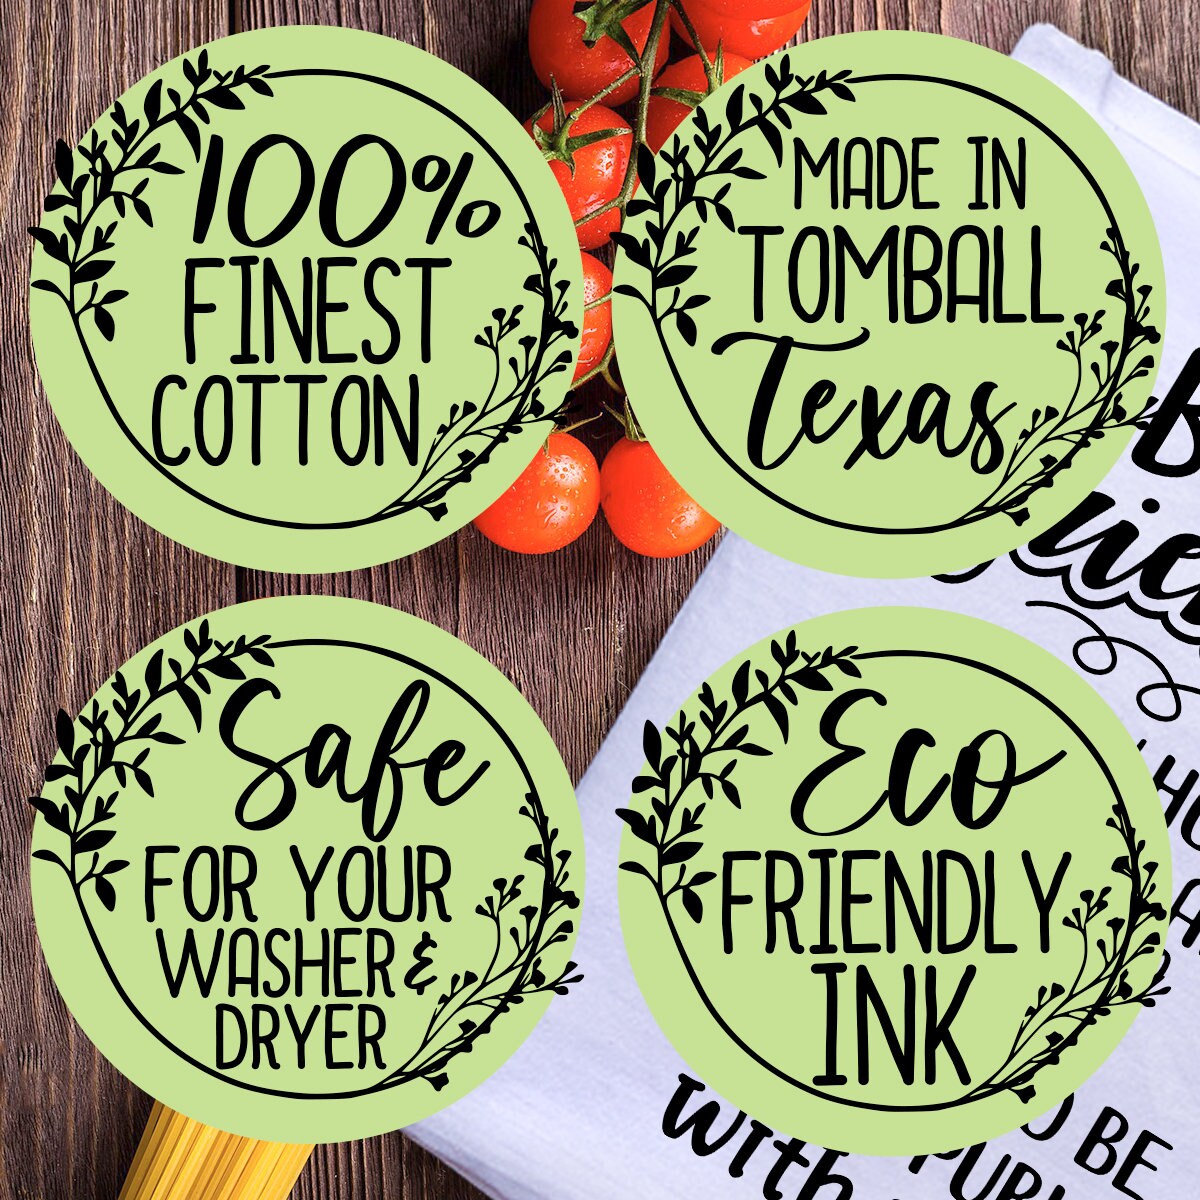 We're Going to be Best Friends Forever - Tea Towel - Lone Star Art